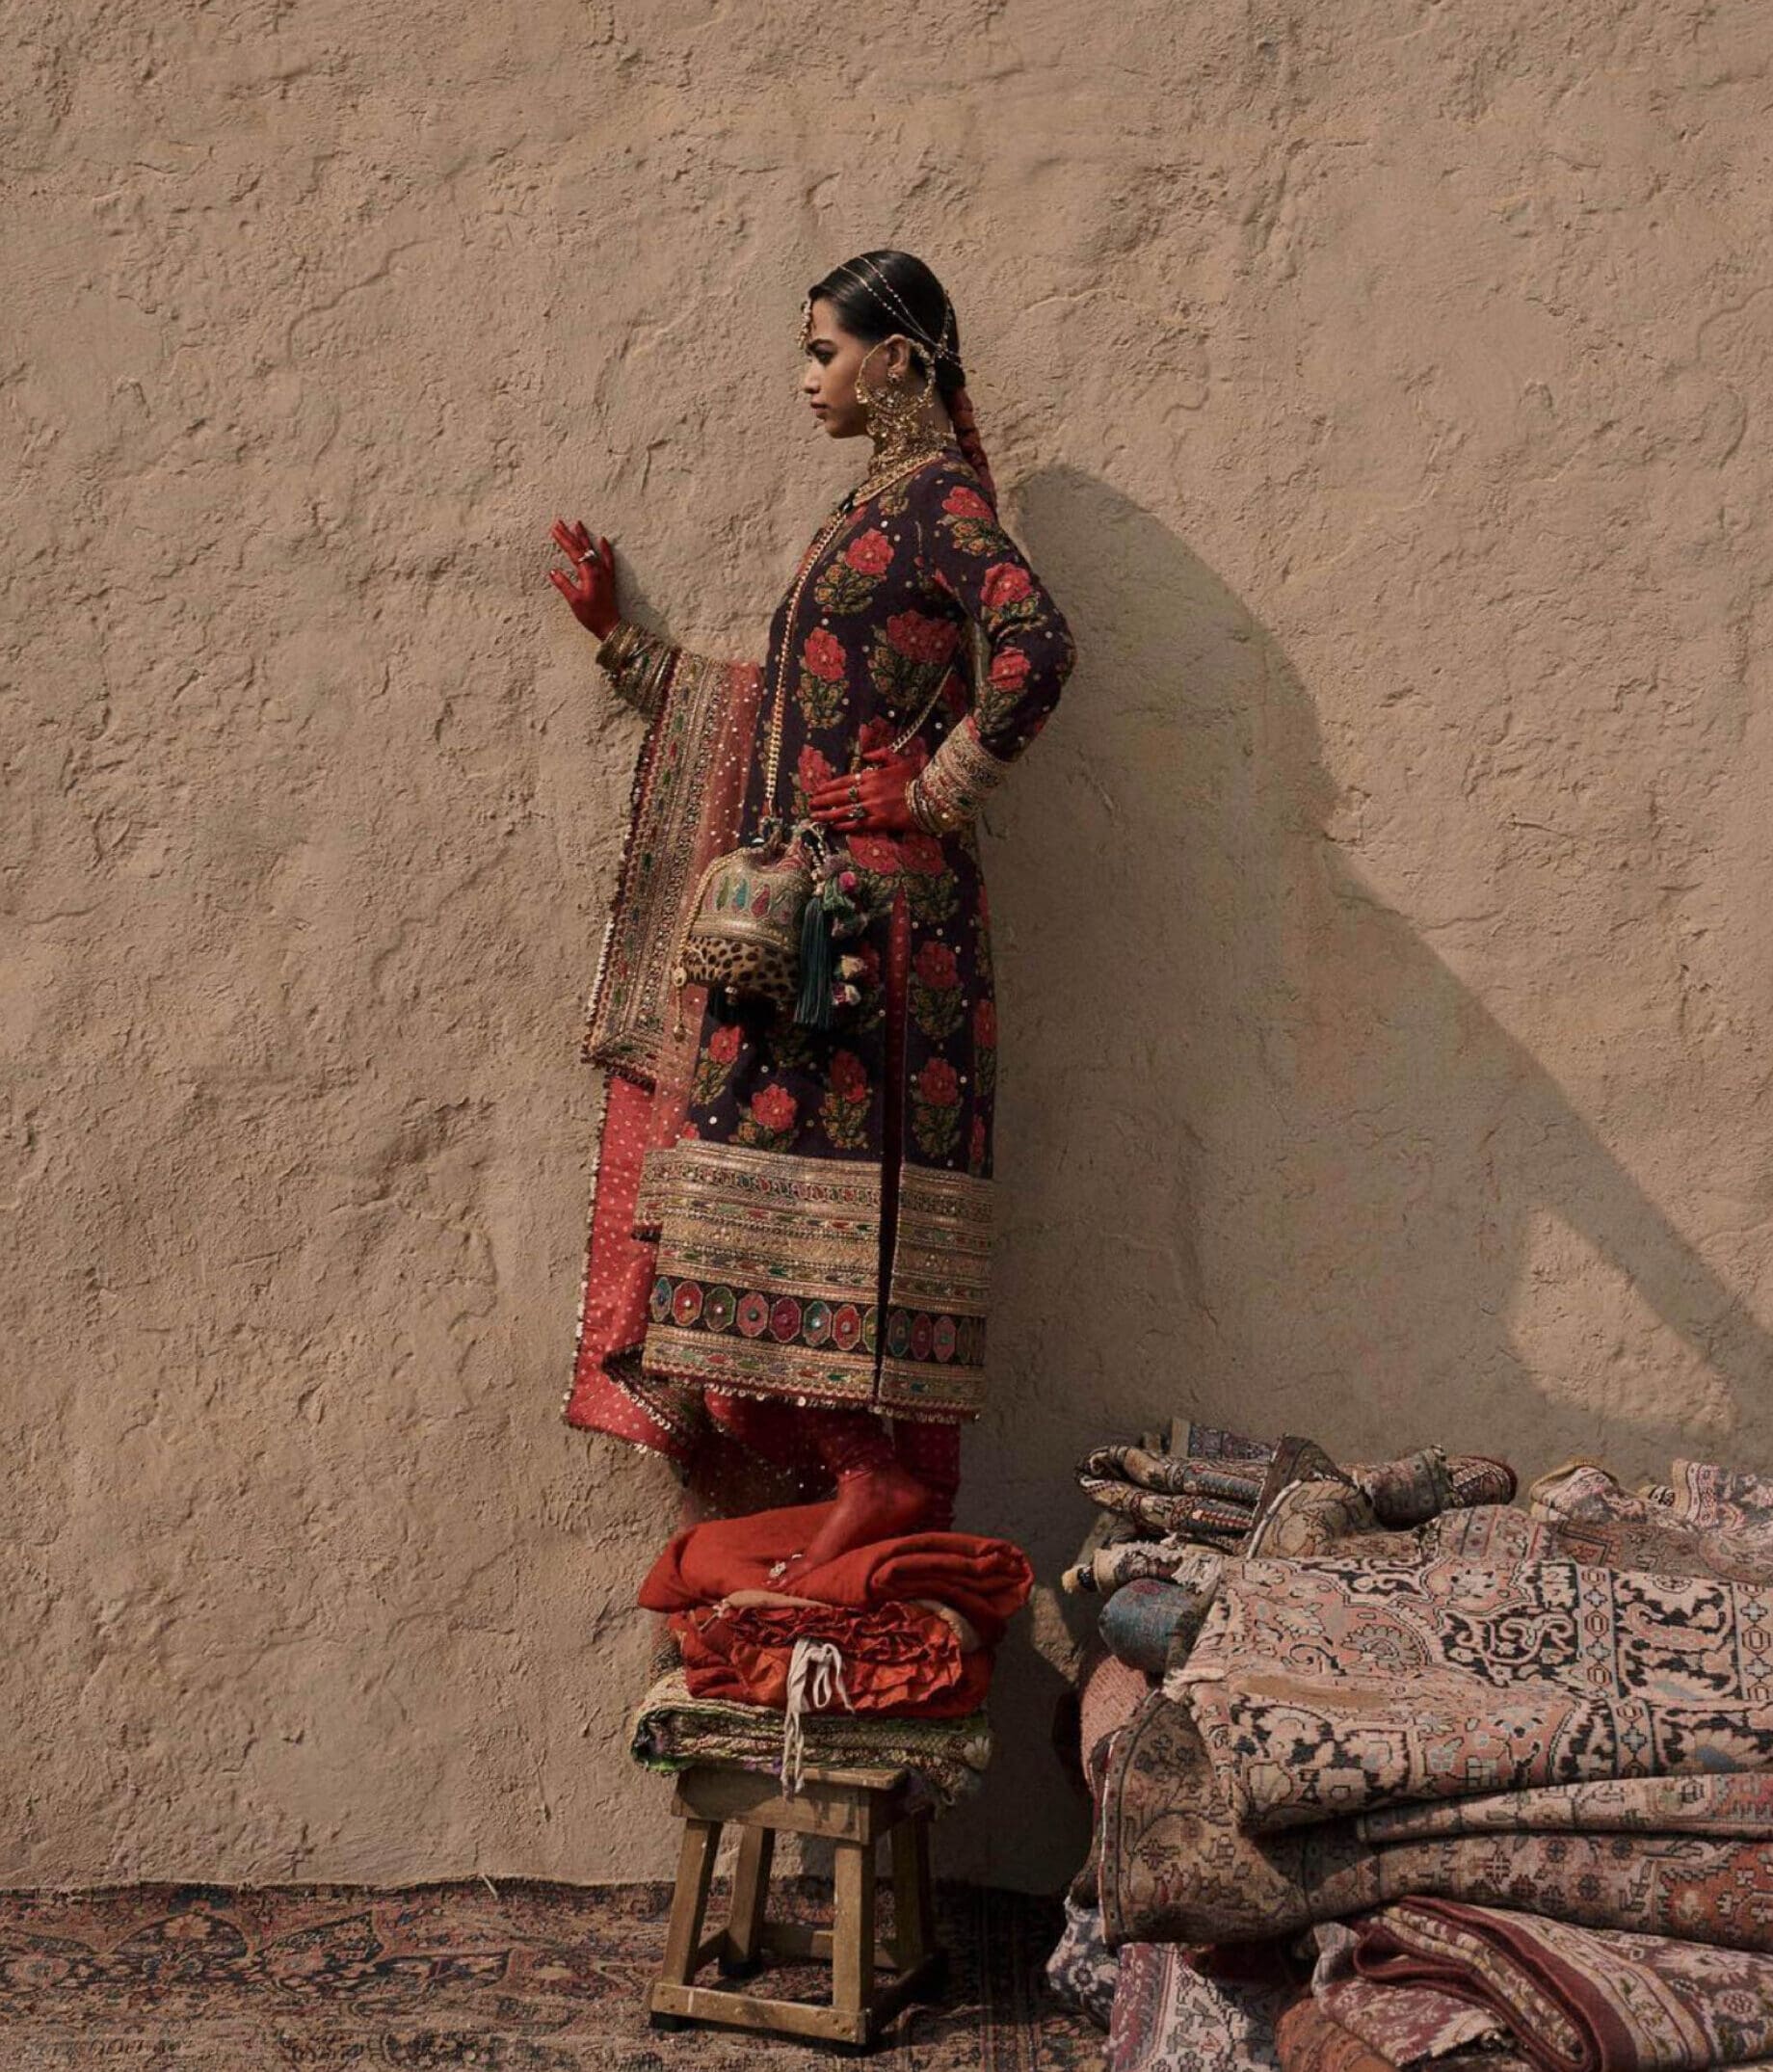 Mumbai creatives | A woman dressed in a traditional ensemble standing on a chair on top of rugs.